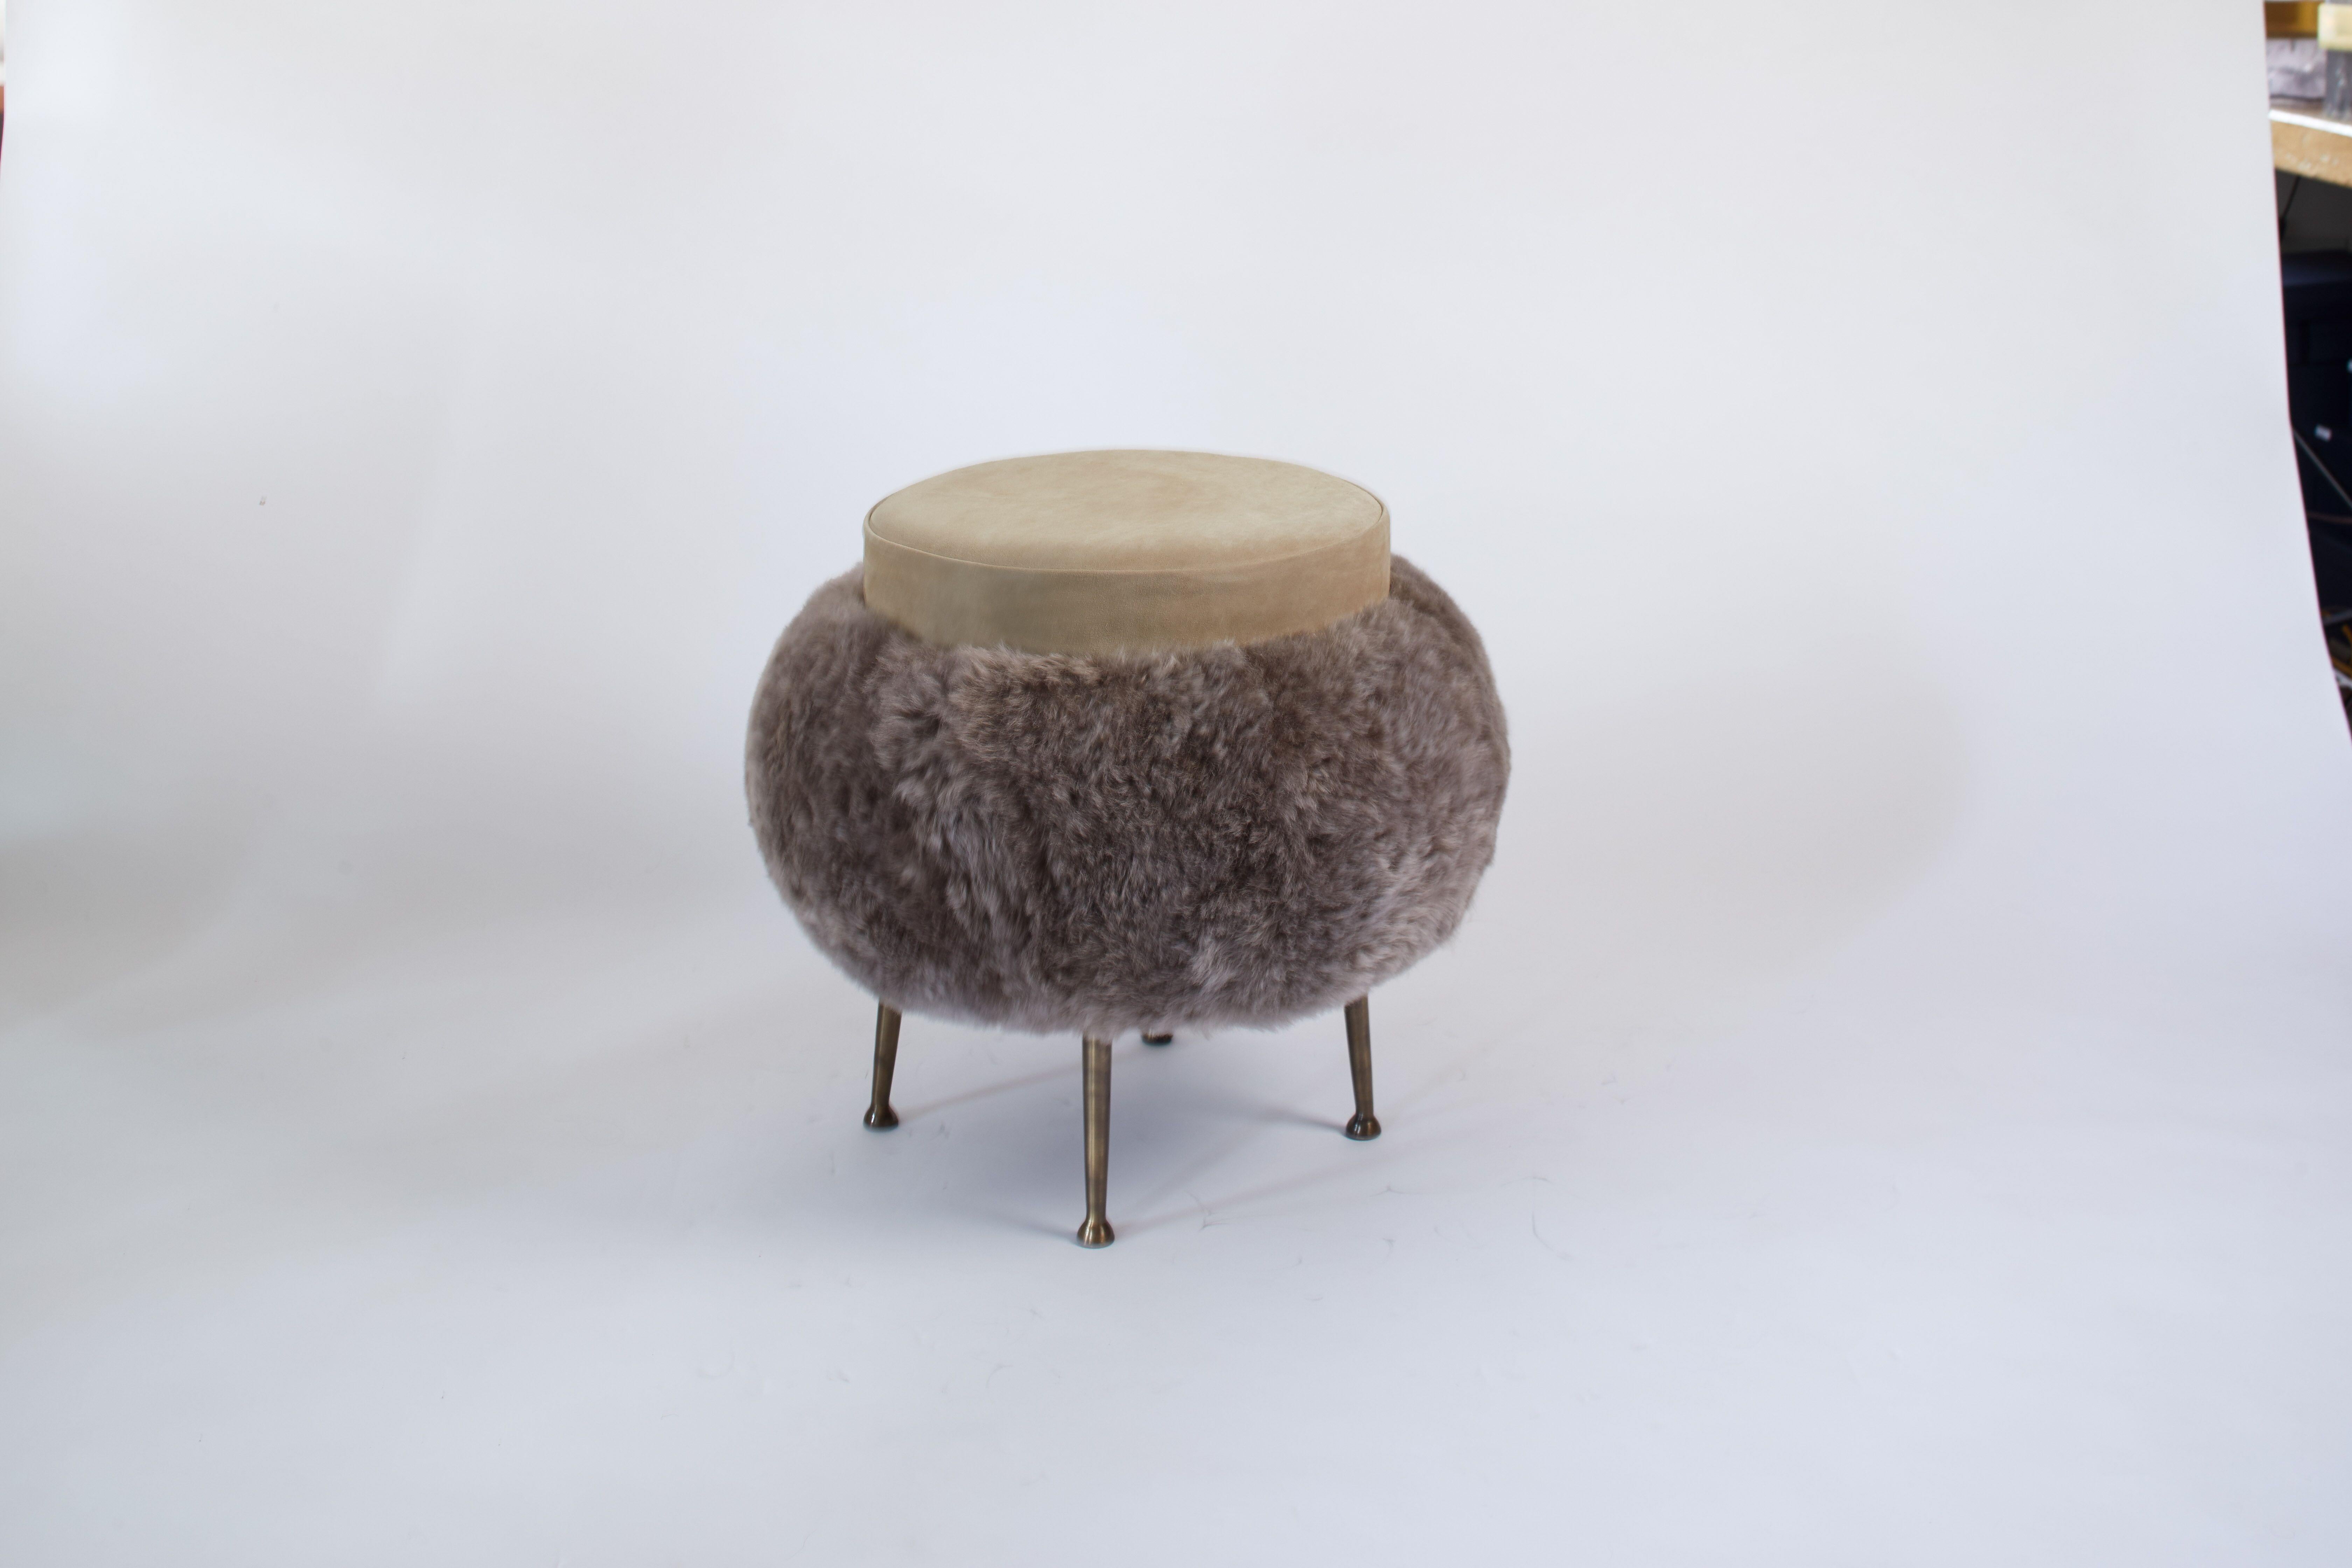 Contemporary Contemproarary French Bespoke Stool with Taupe suede & Long Haired Scandavnaian 